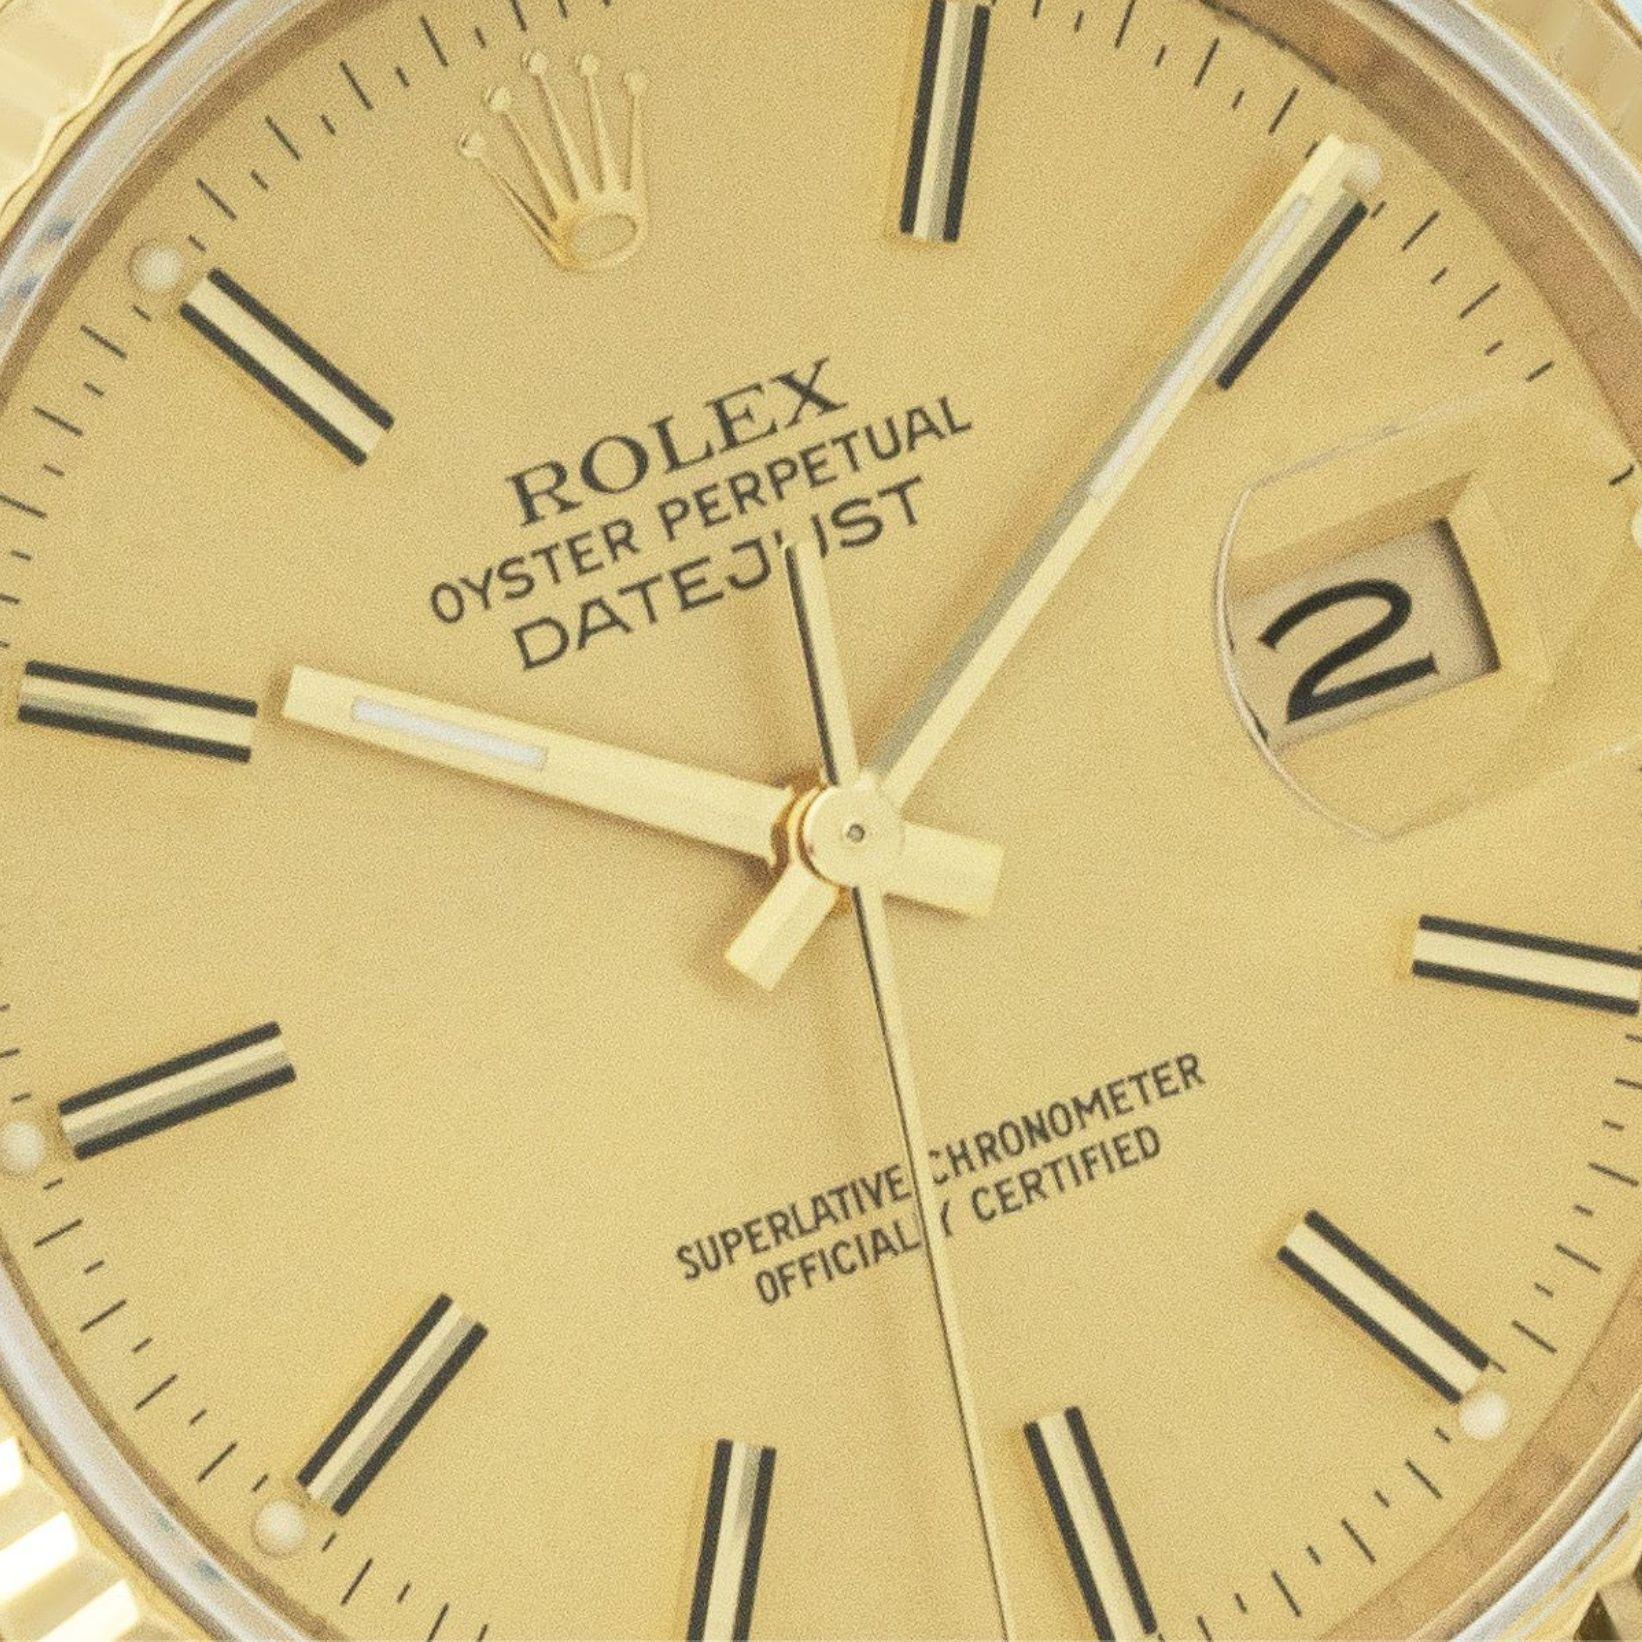 A 36mm Datejust in yellow gold. Featuring a champagne dial with applied hour markers and a fluted yellow gold bezel. The watch is fitted with a sapphire glass, a self-winding automatic movement and a generic brown leather strap equipped with an